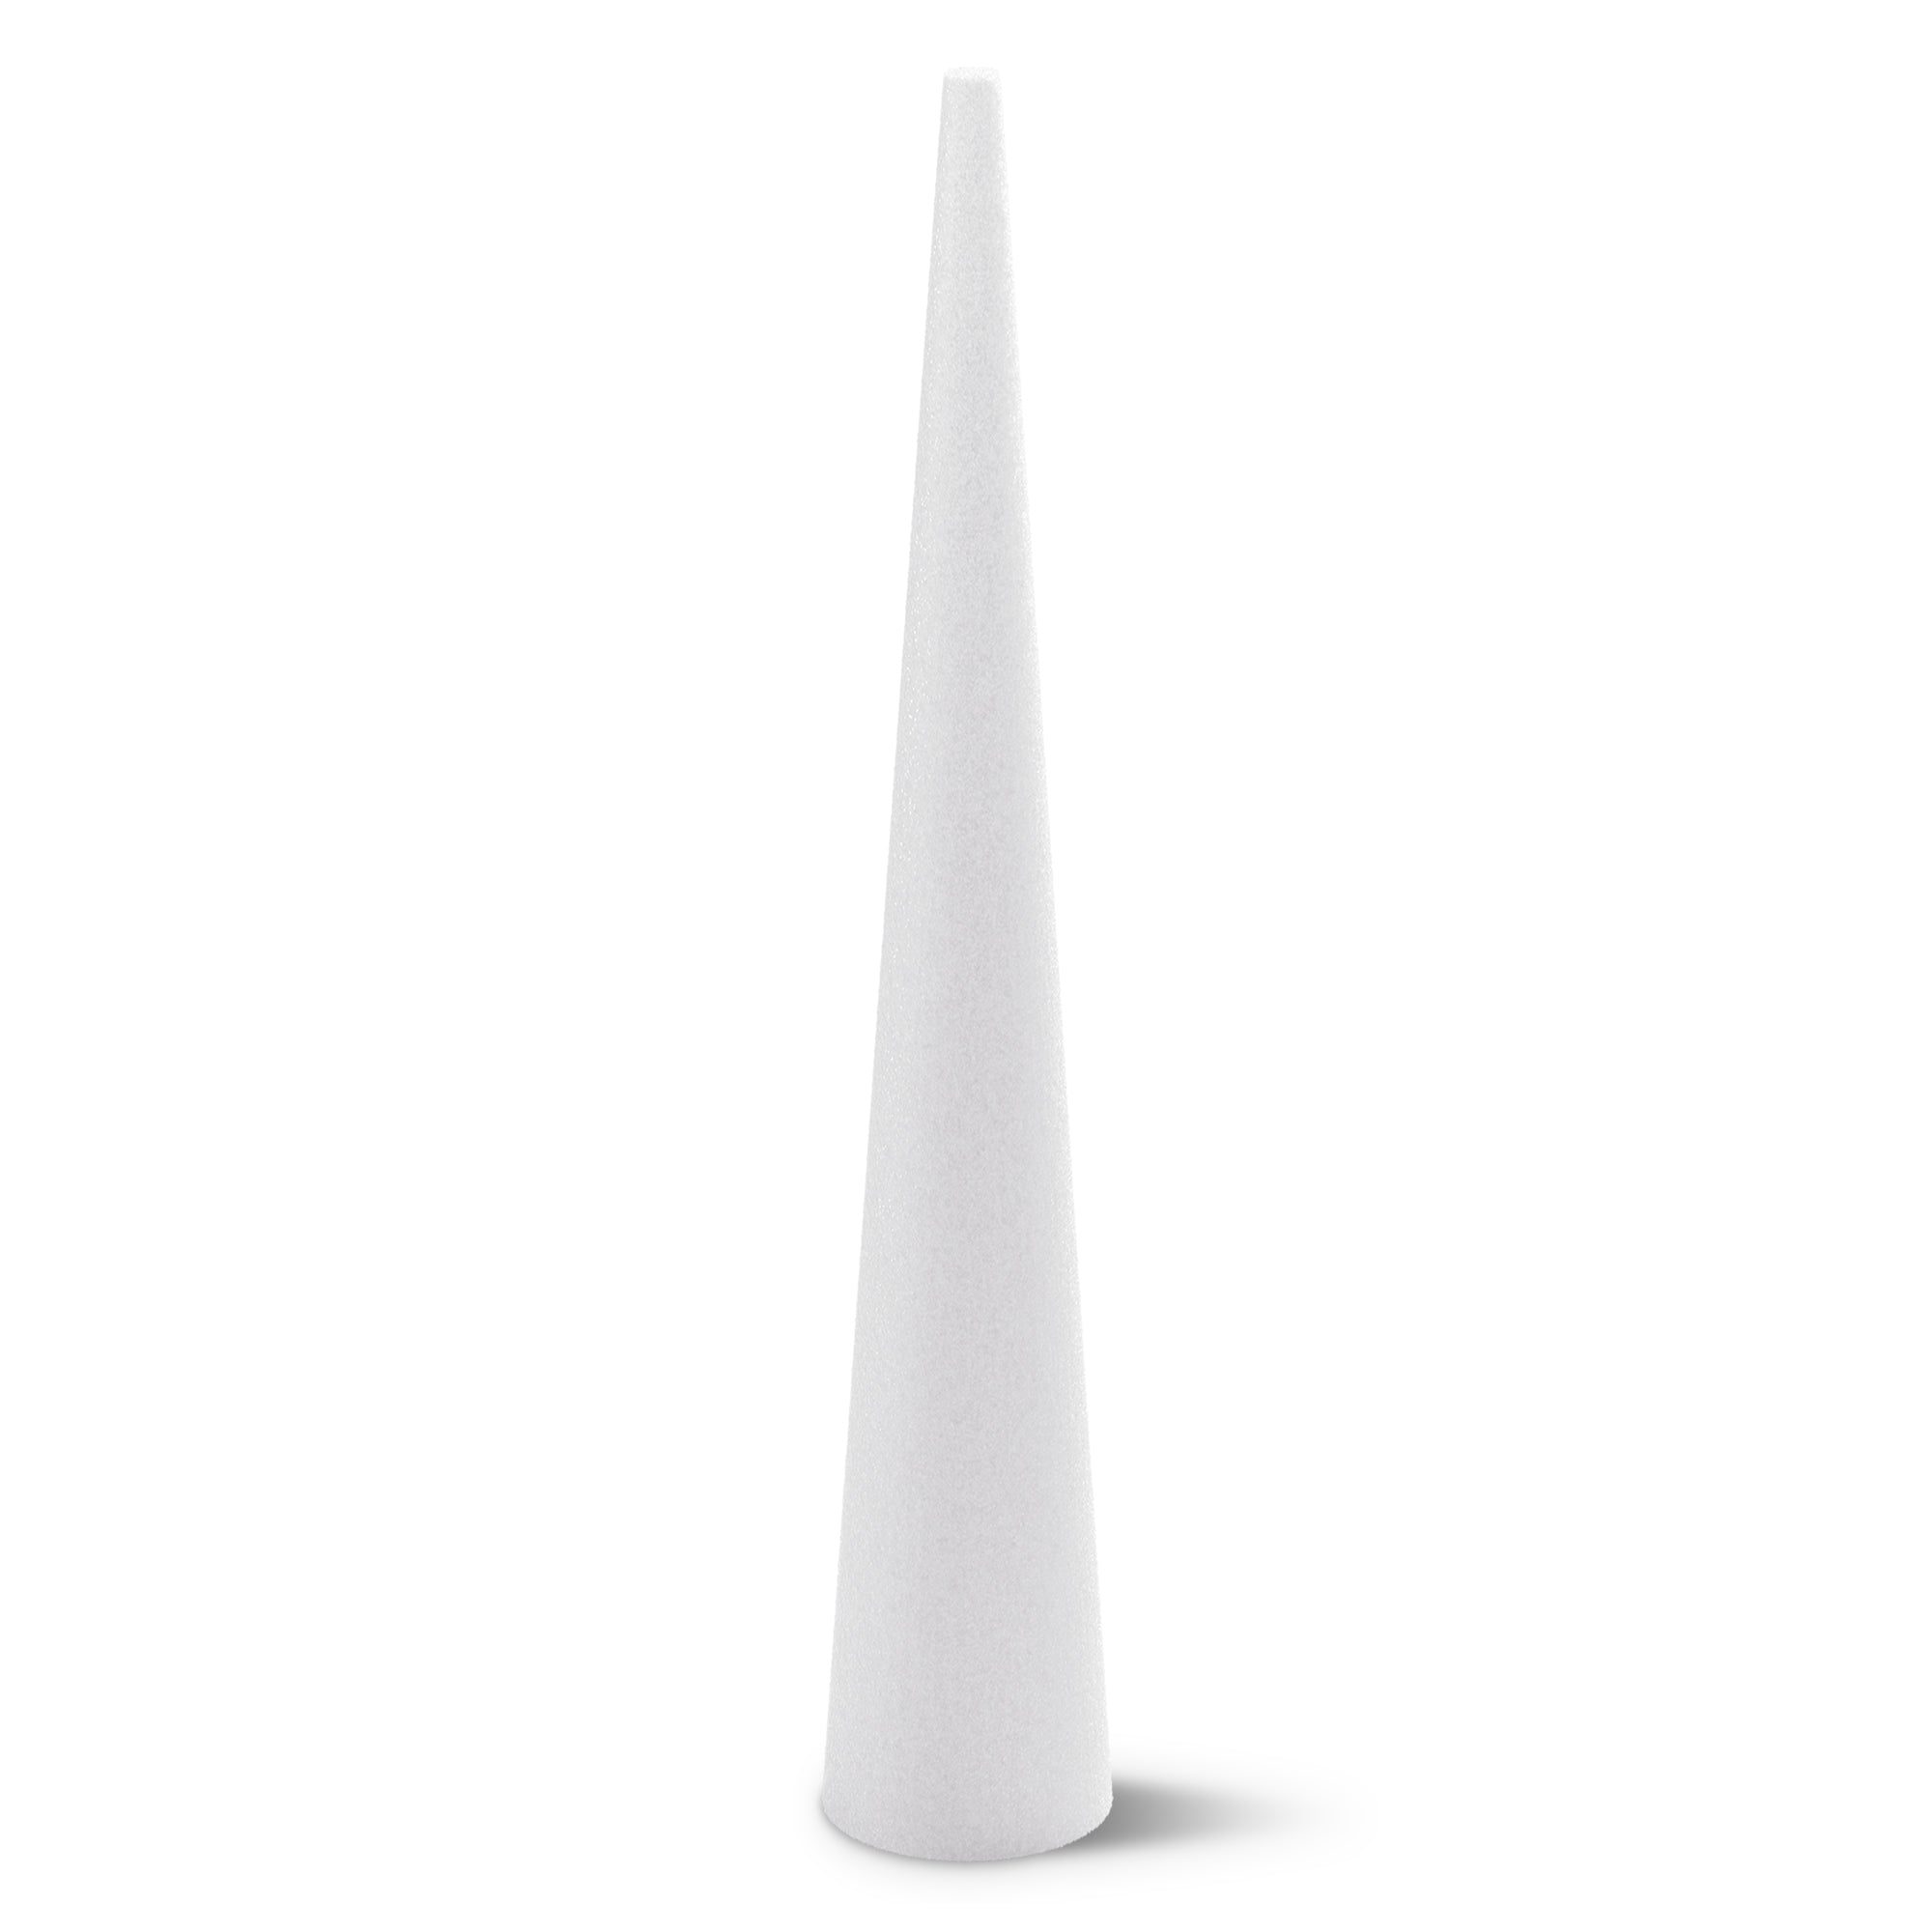 Large Foam Cones for Crafts - Set of 6-12 inches Tall - DIY Craft Supplies